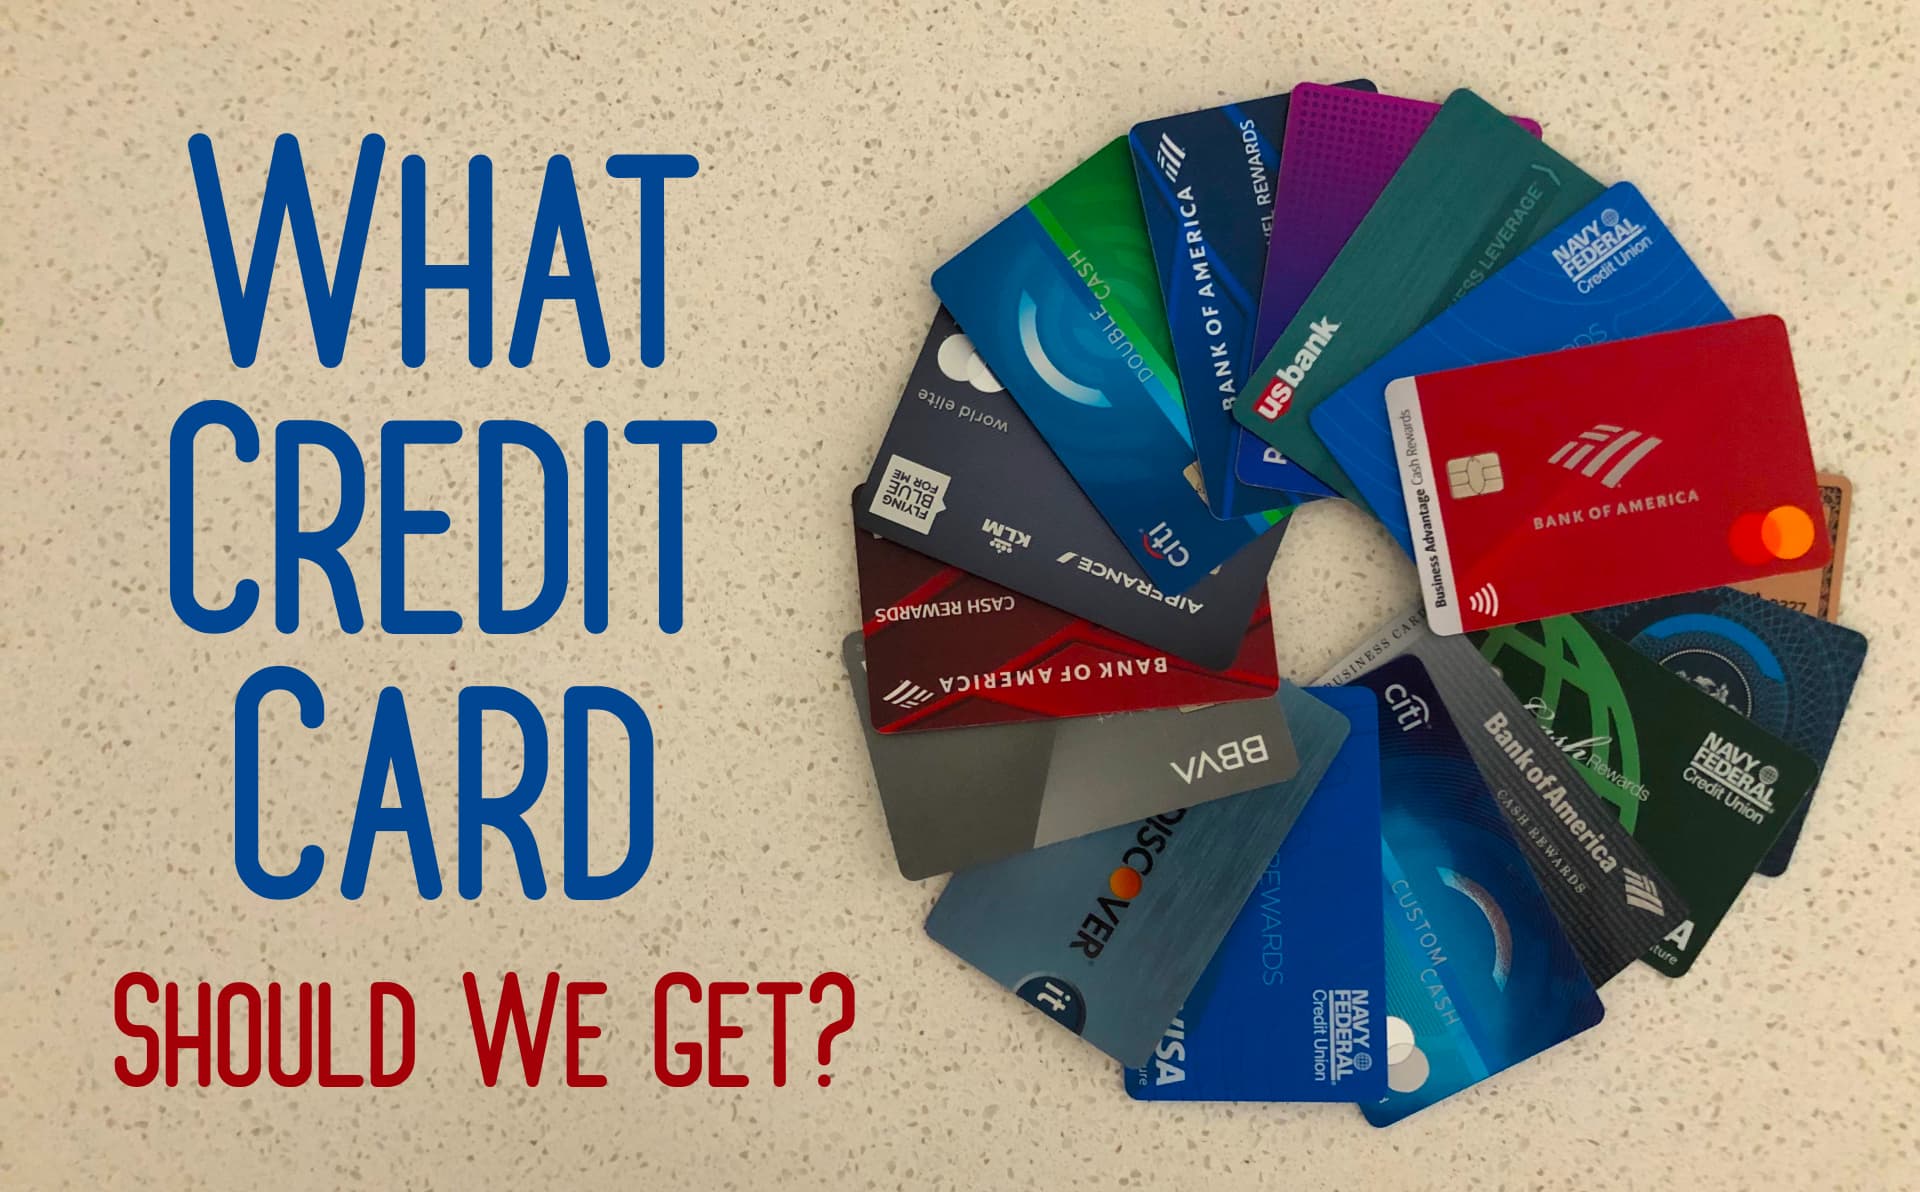 Which Credit Card Should We Get?